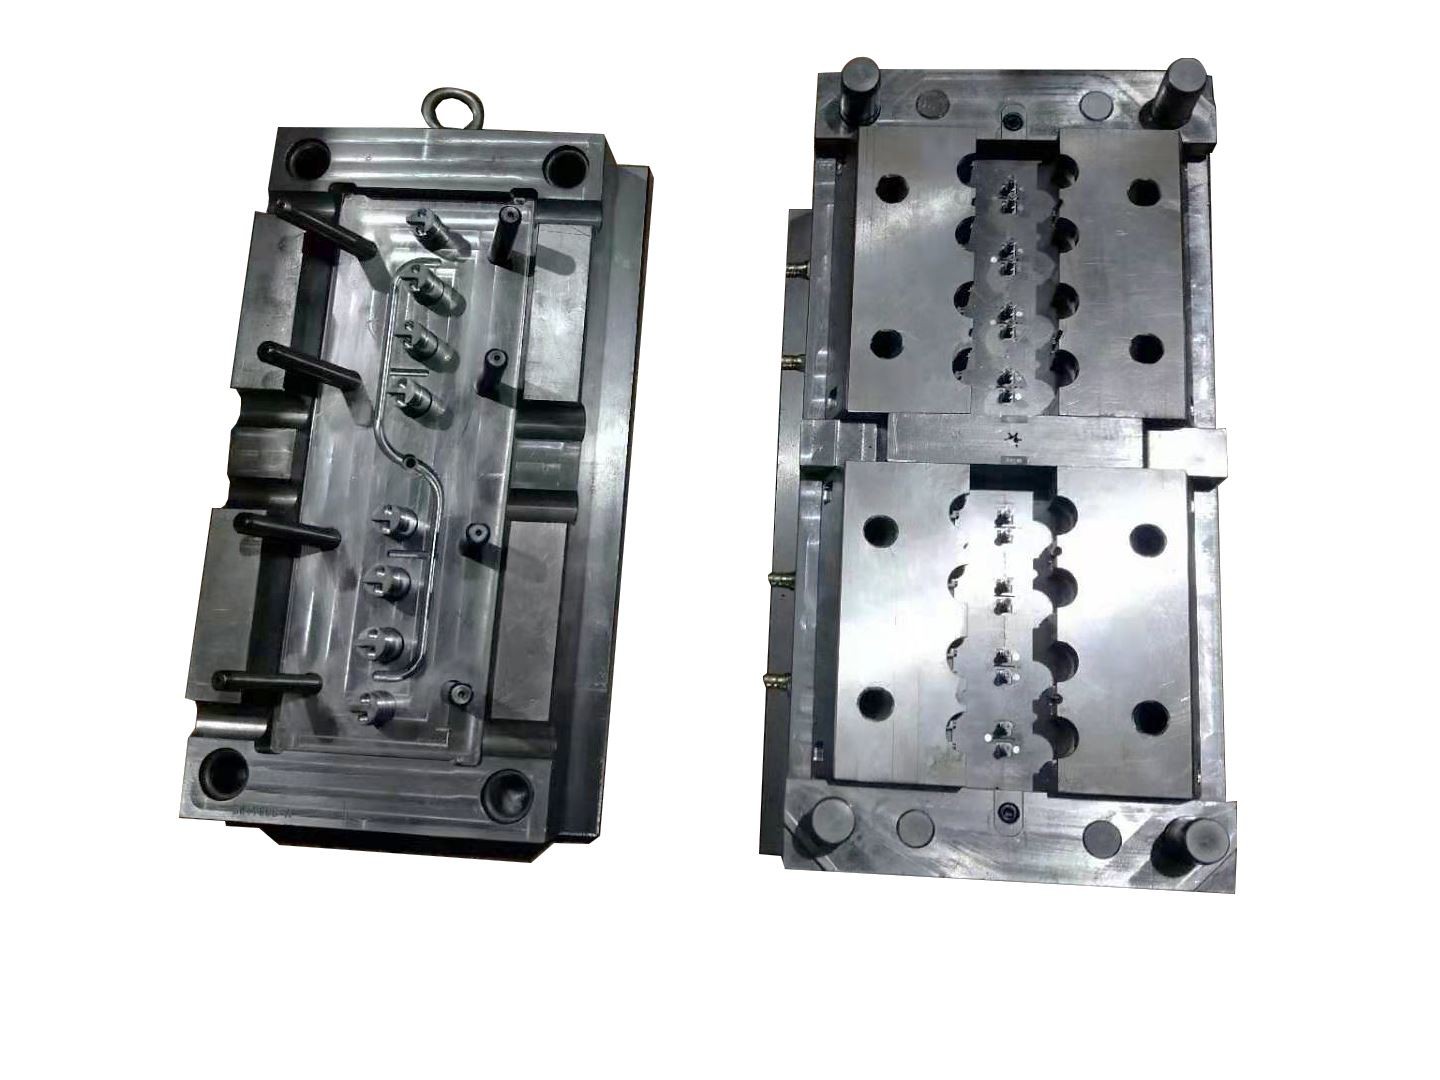 What Materials Are Used For Processing And Manufacturing Injection Molds?